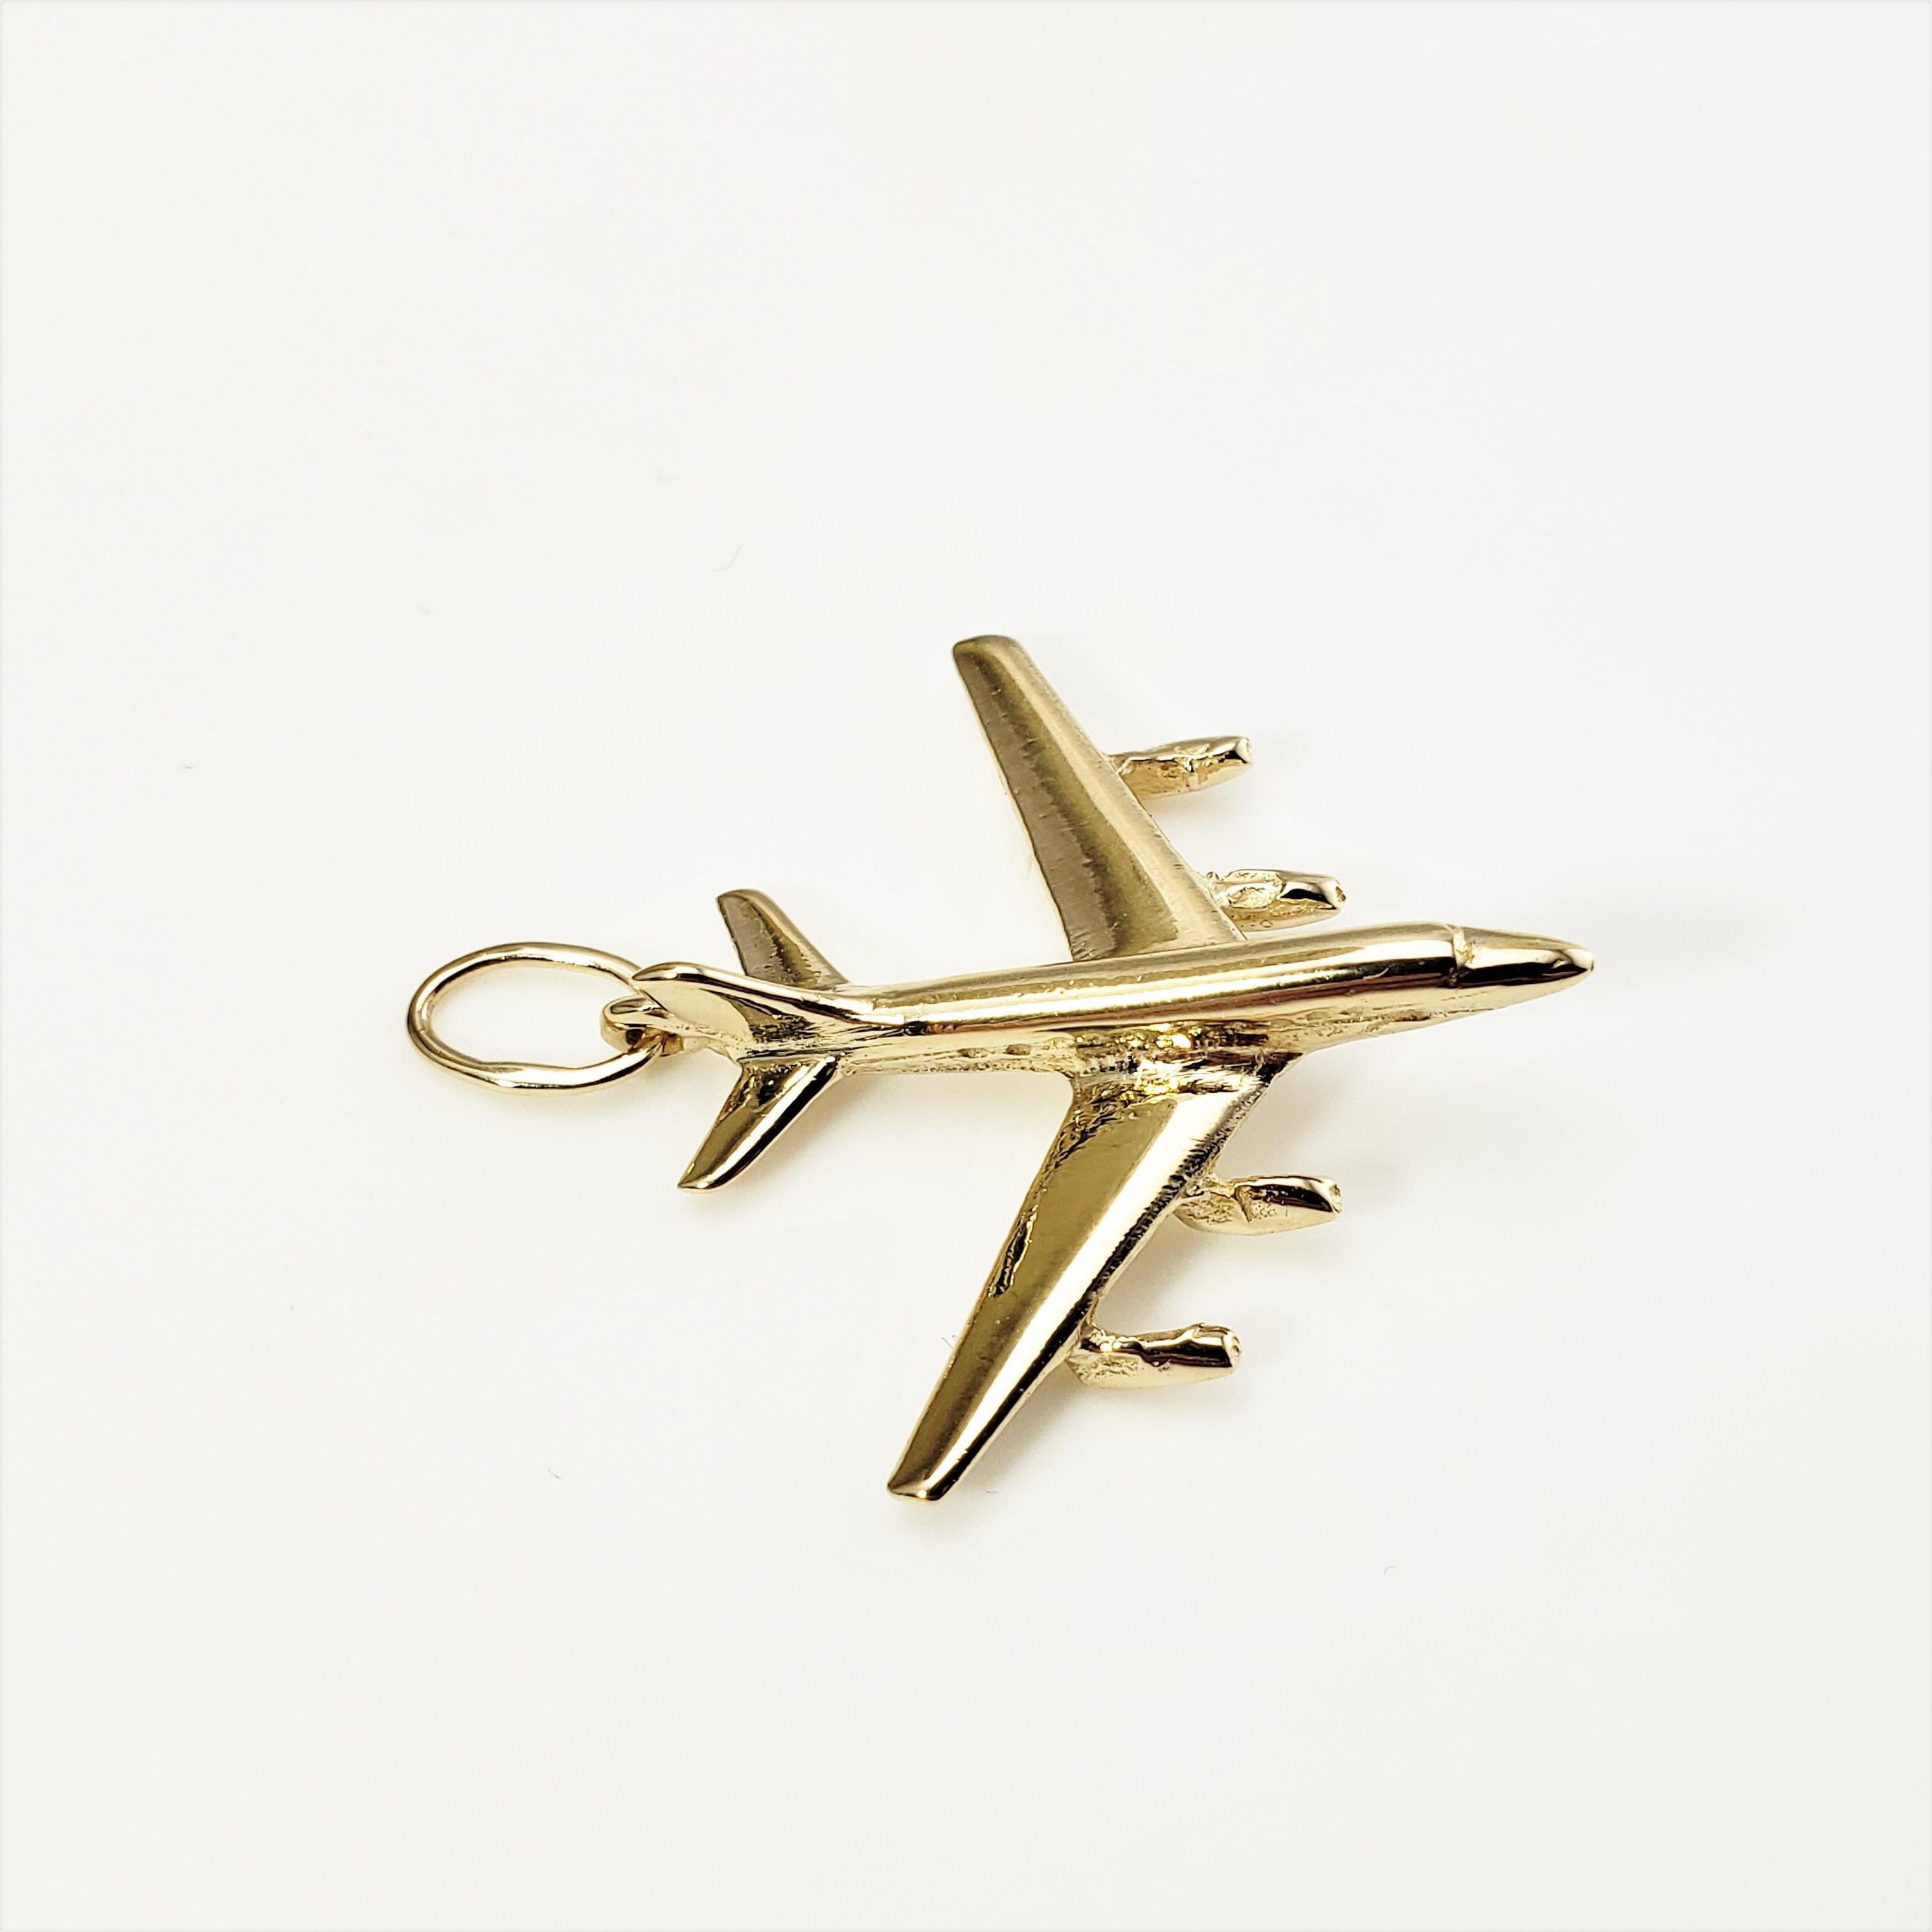 14 Karat Yellow Gold Airplane Charm-

Perfect addition to your travel charm collection!

This lovely 3D charm features a miniature airplane meticulously detailed in 14K yellow gold.

Size:  27 mm x 26 mm (actual charm)

Weight:  2.1 dwt. /  3.4